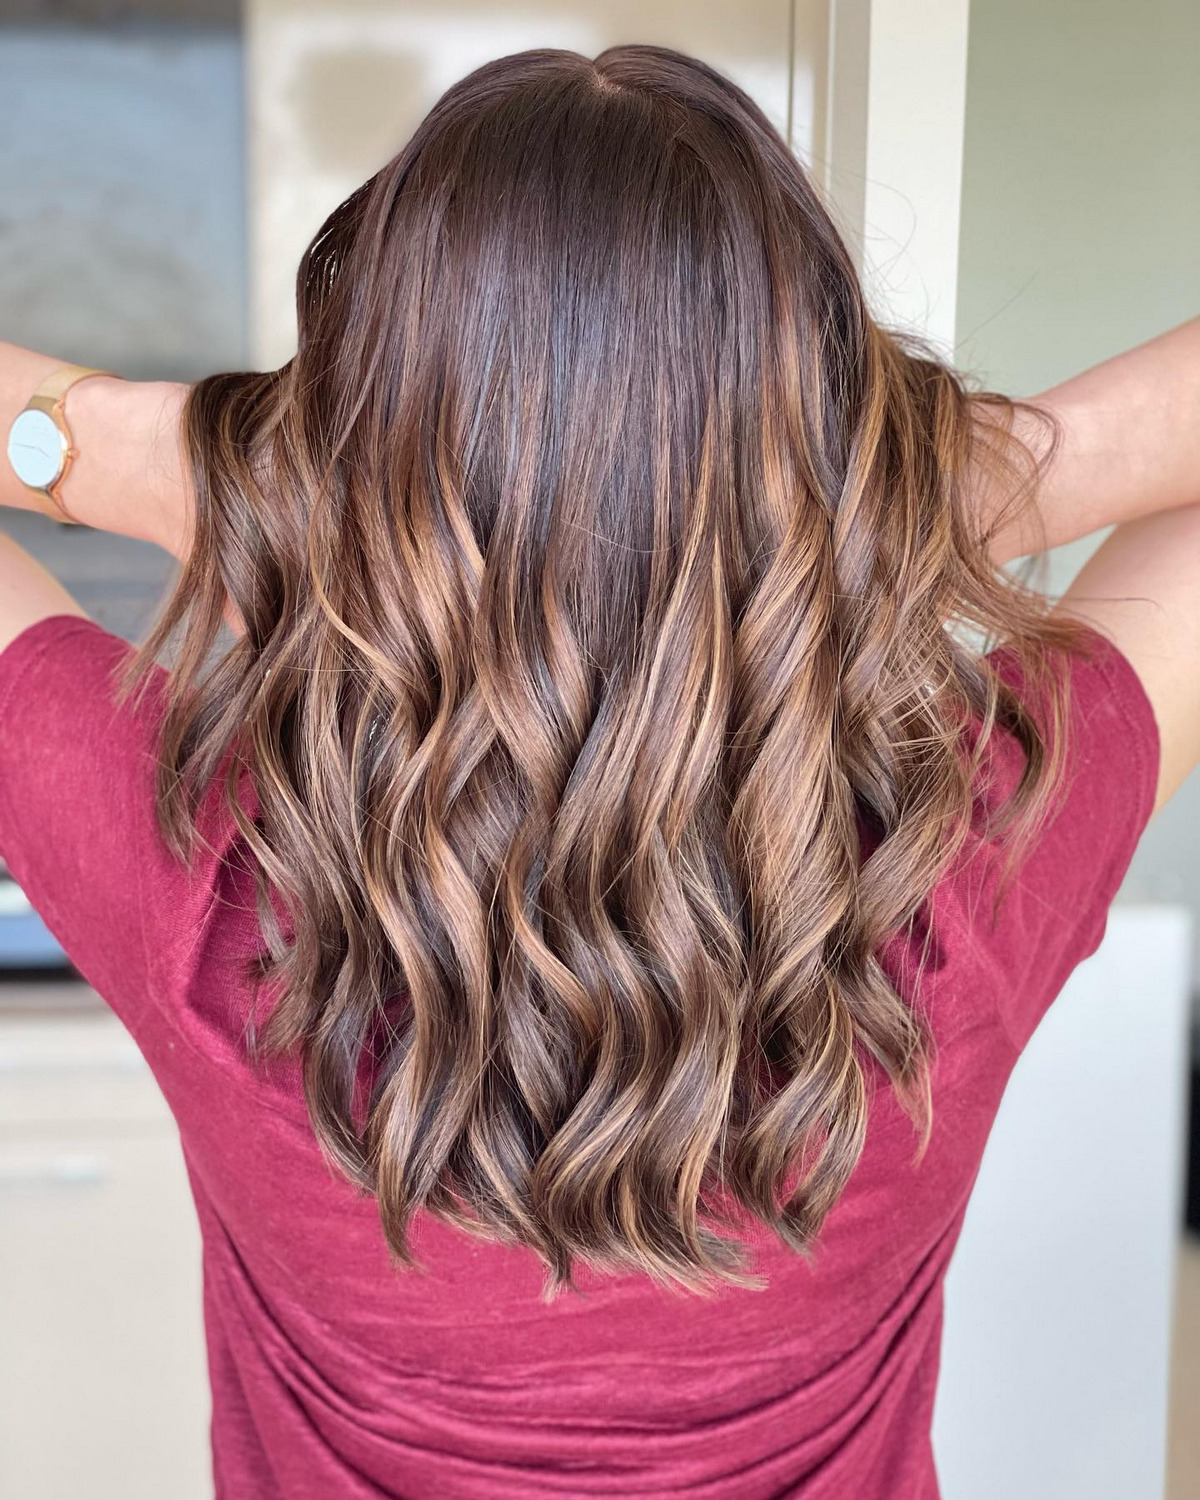 From uneven color to this beautiful balayage of her 